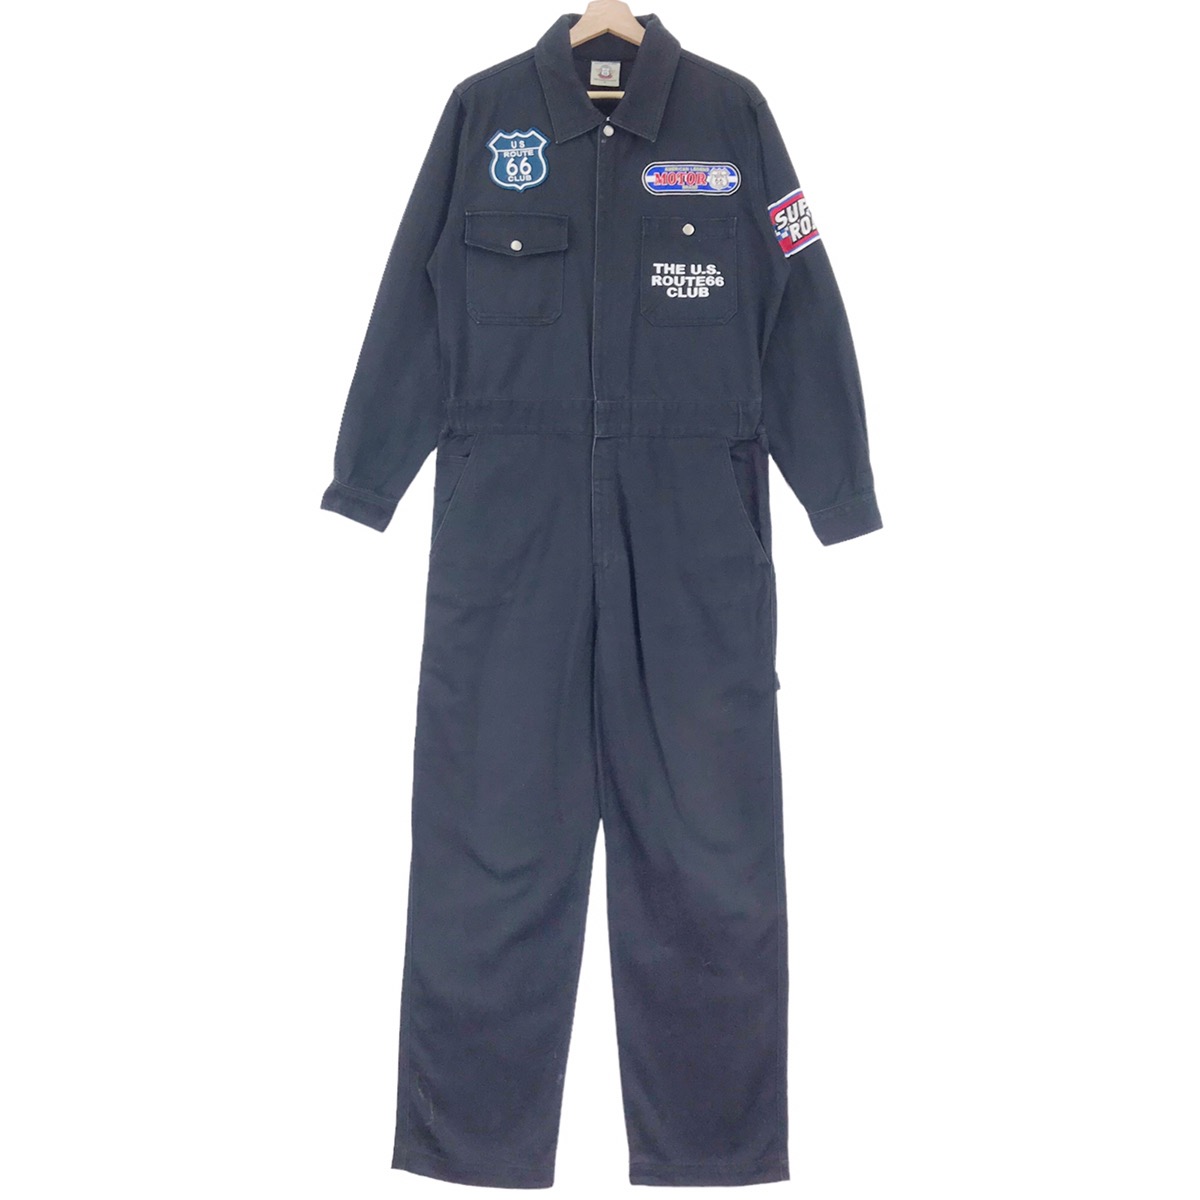 Vintage - 90’s Route 66 Club Jumpsuits Patches Overall Worker - 1